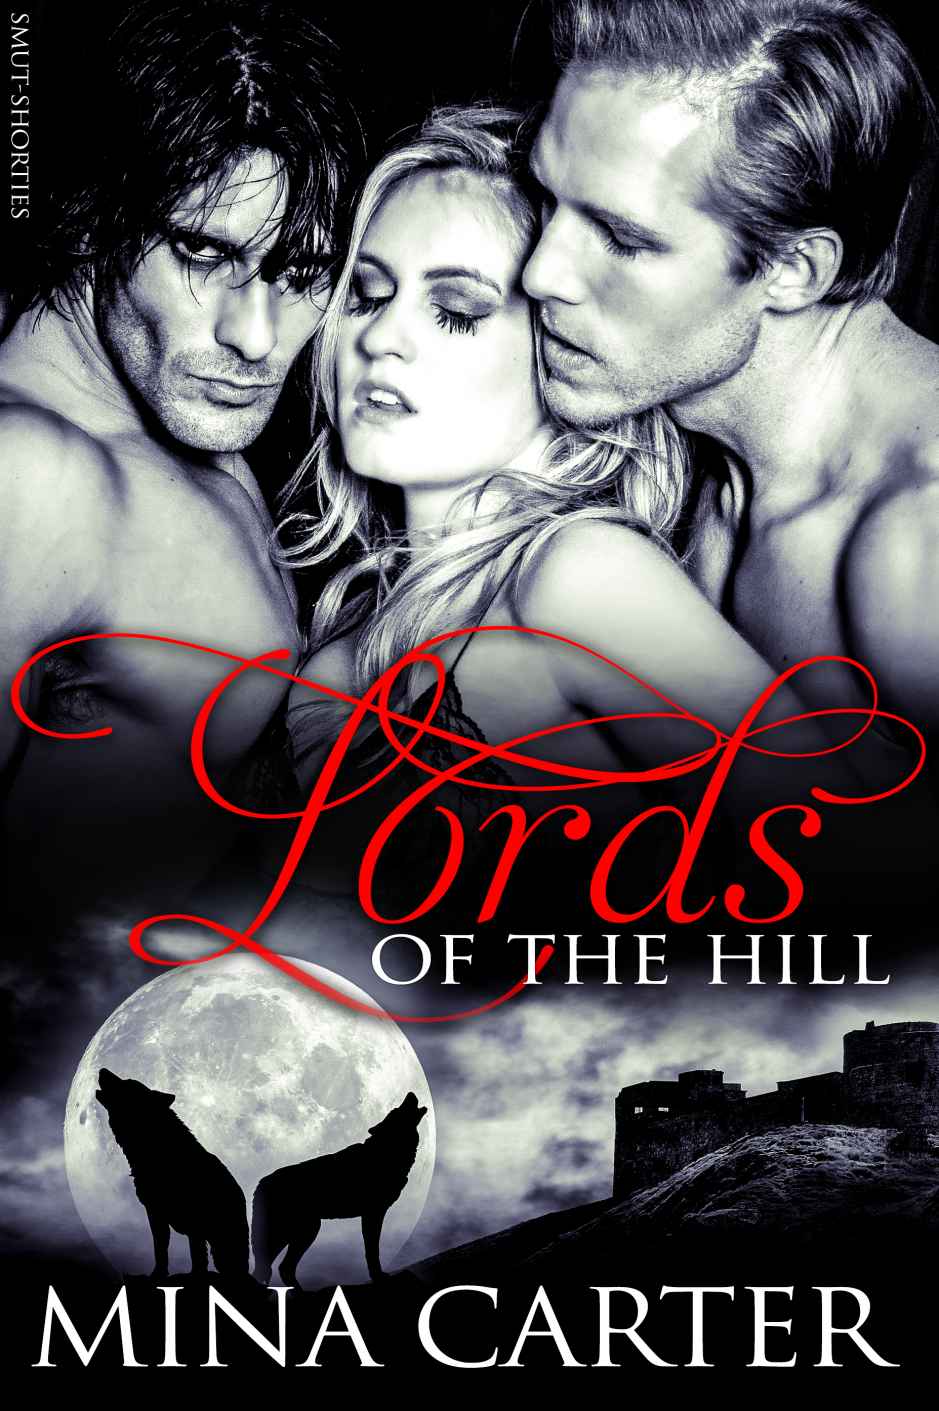 Lords of the Hill: BBW Werewolf Erotica (Smut-Shorties Book 3)